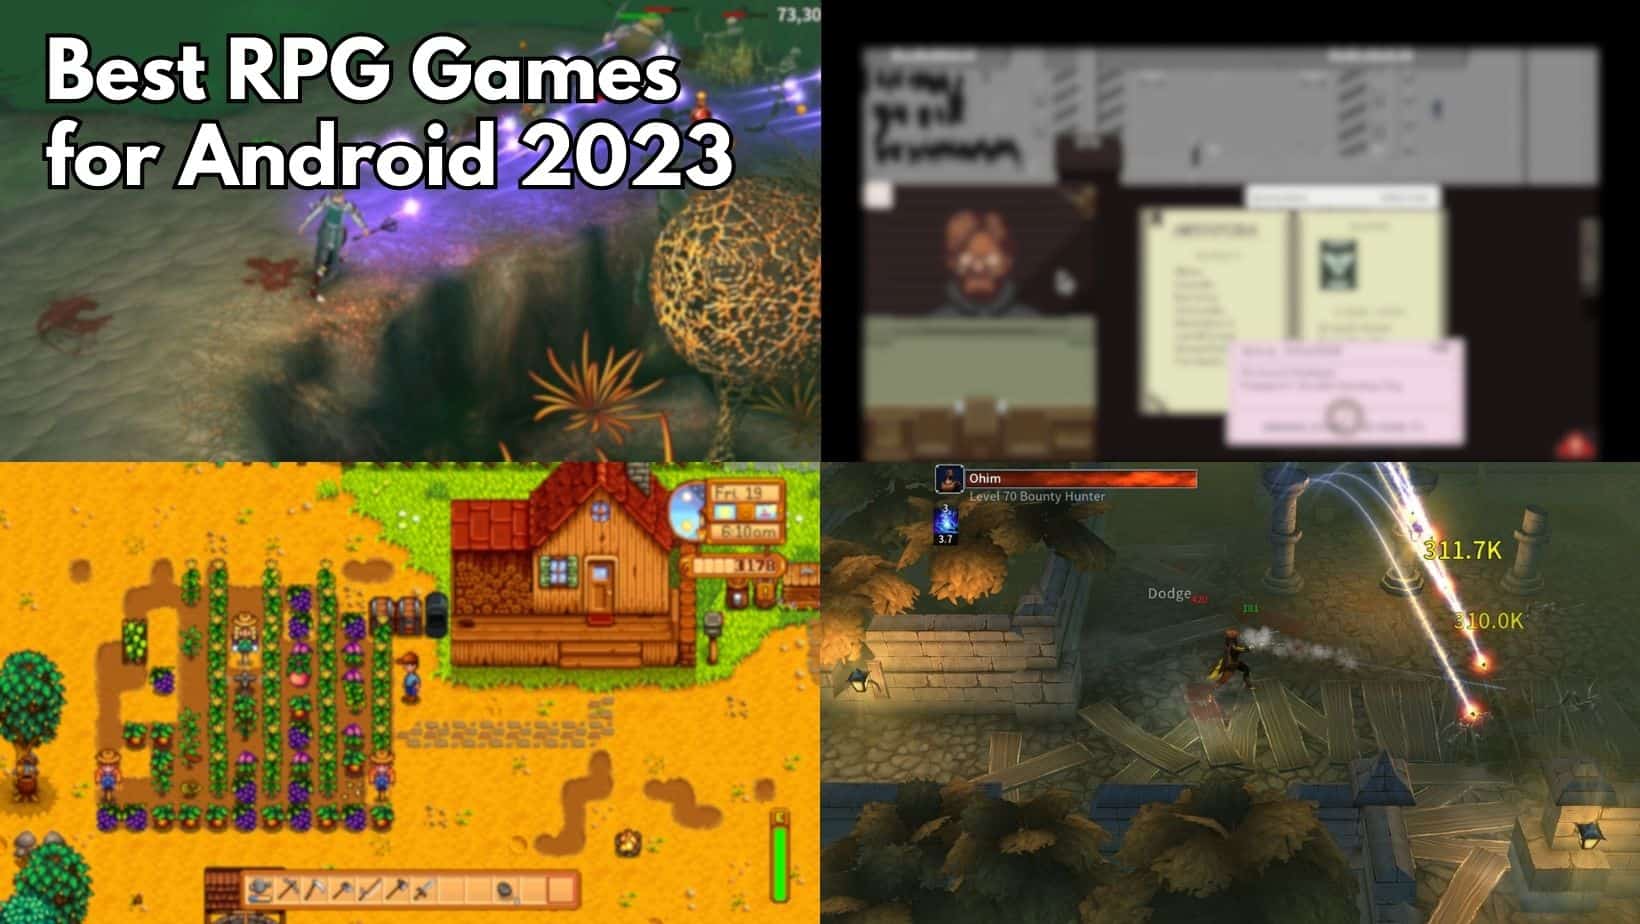 15 Best RPG Games for Android in 2023 - LitRPG Reads